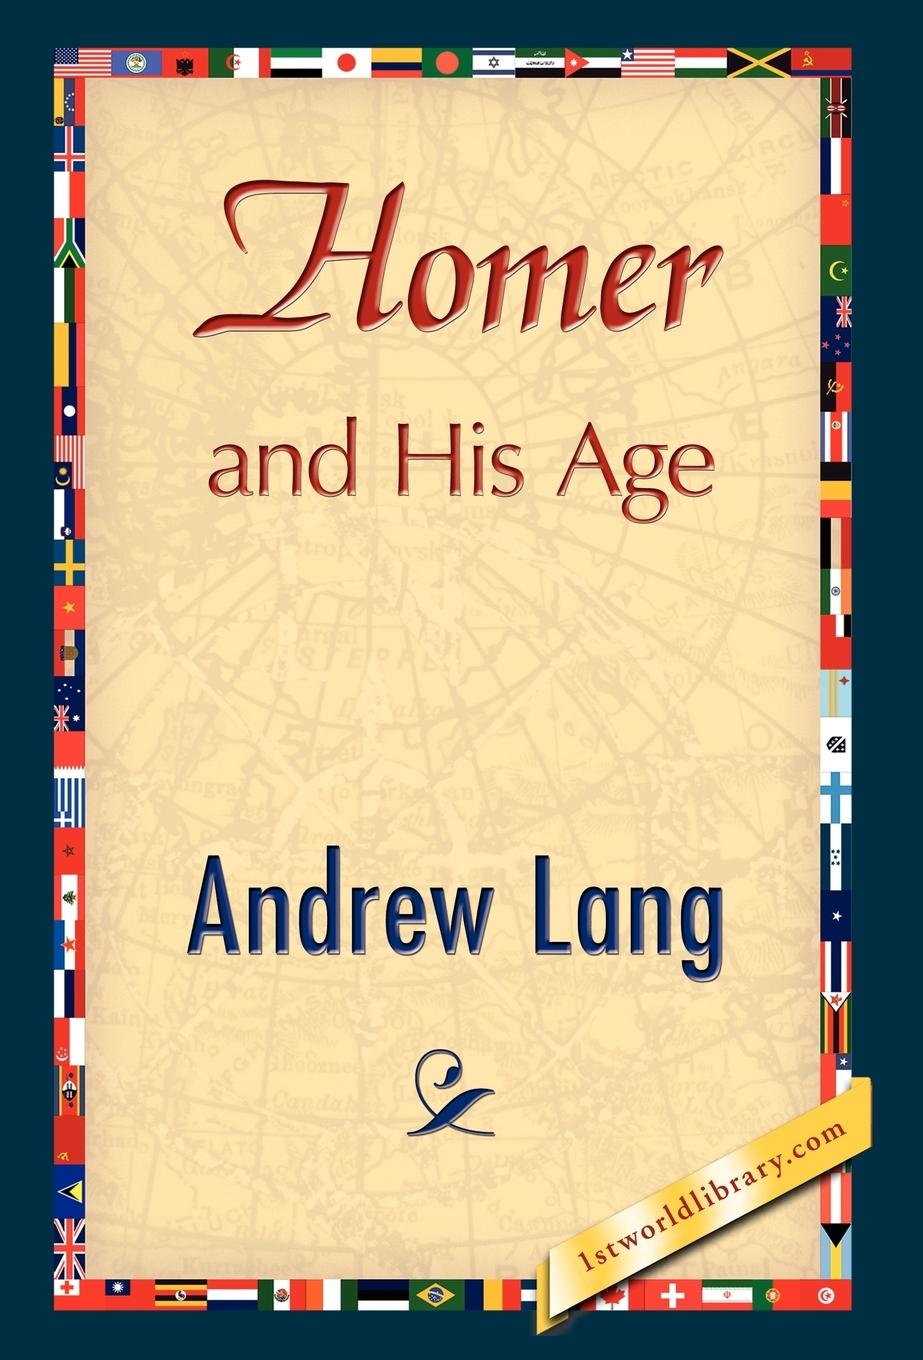 Homer and His Age - Lang, Andrew